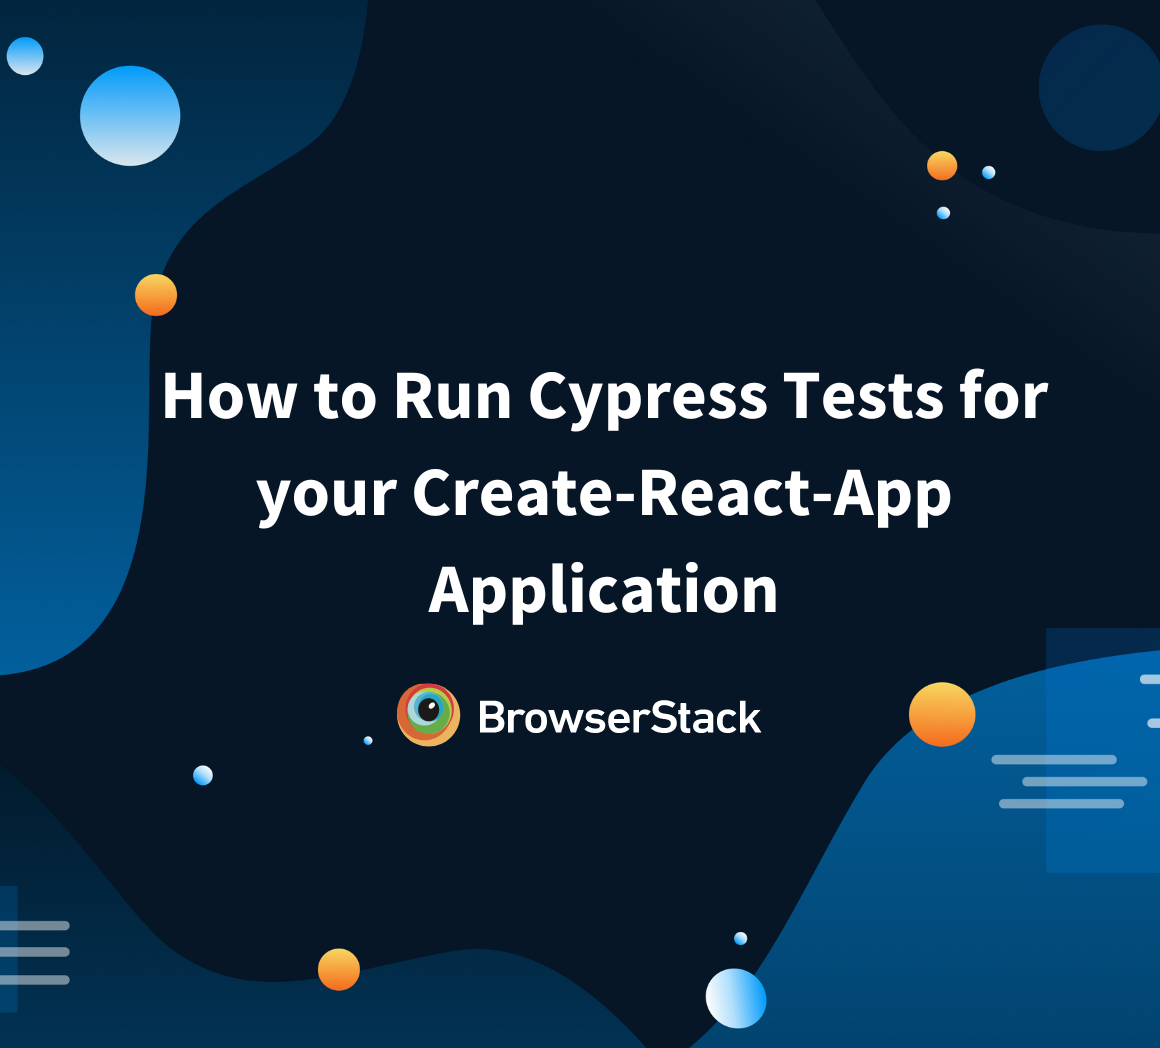 How to Run Cypress Tests for your Create-React-App Application